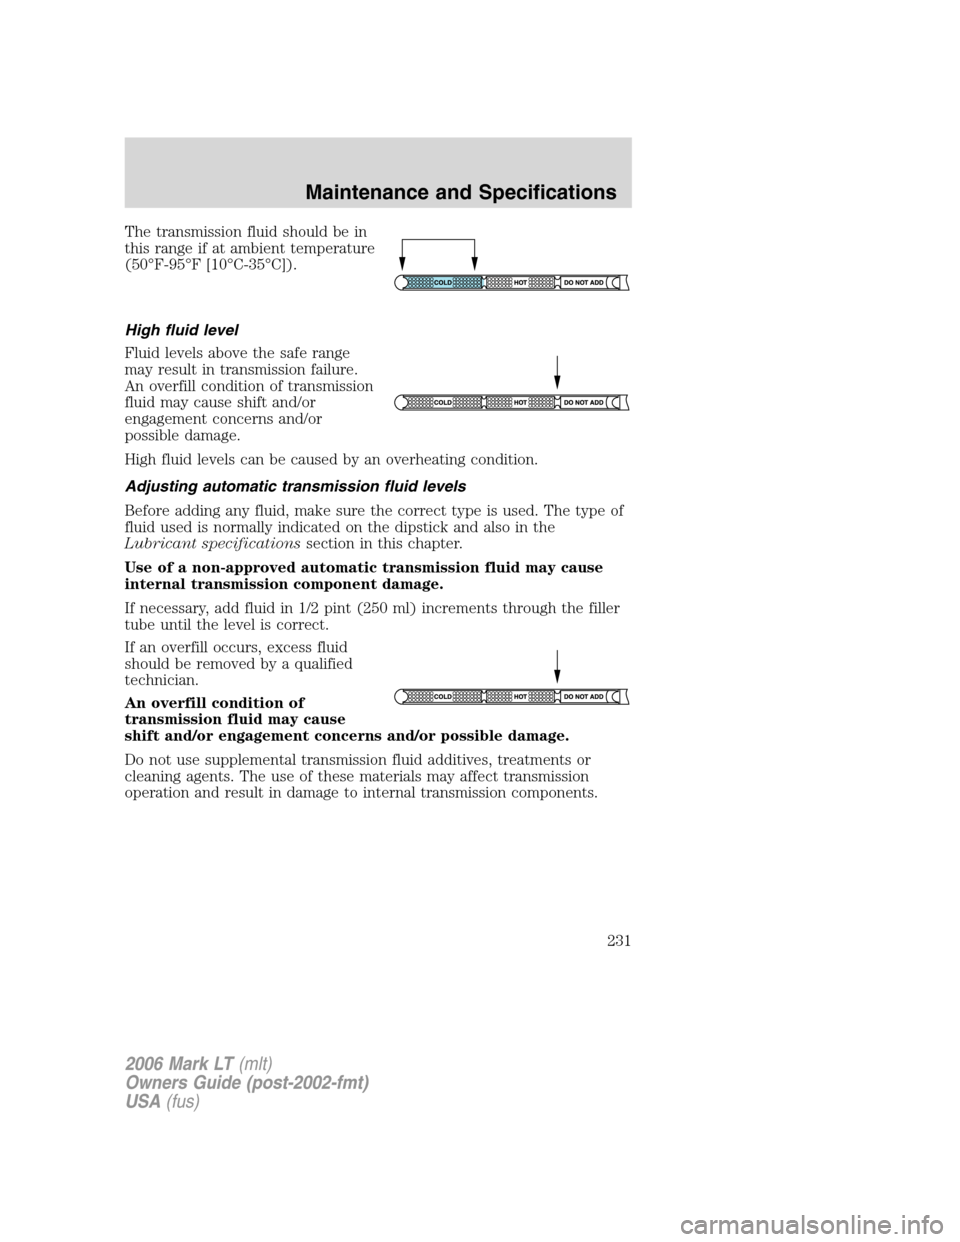 LINCOLN MARK LT 2006  Owners Manual The transmission fluid should be in
this range if at ambient temperature
(50°F-95°F [10°C-35°C]).
High fluid level
Fluid levels above the safe range
may result in transmission failure.
An overfill